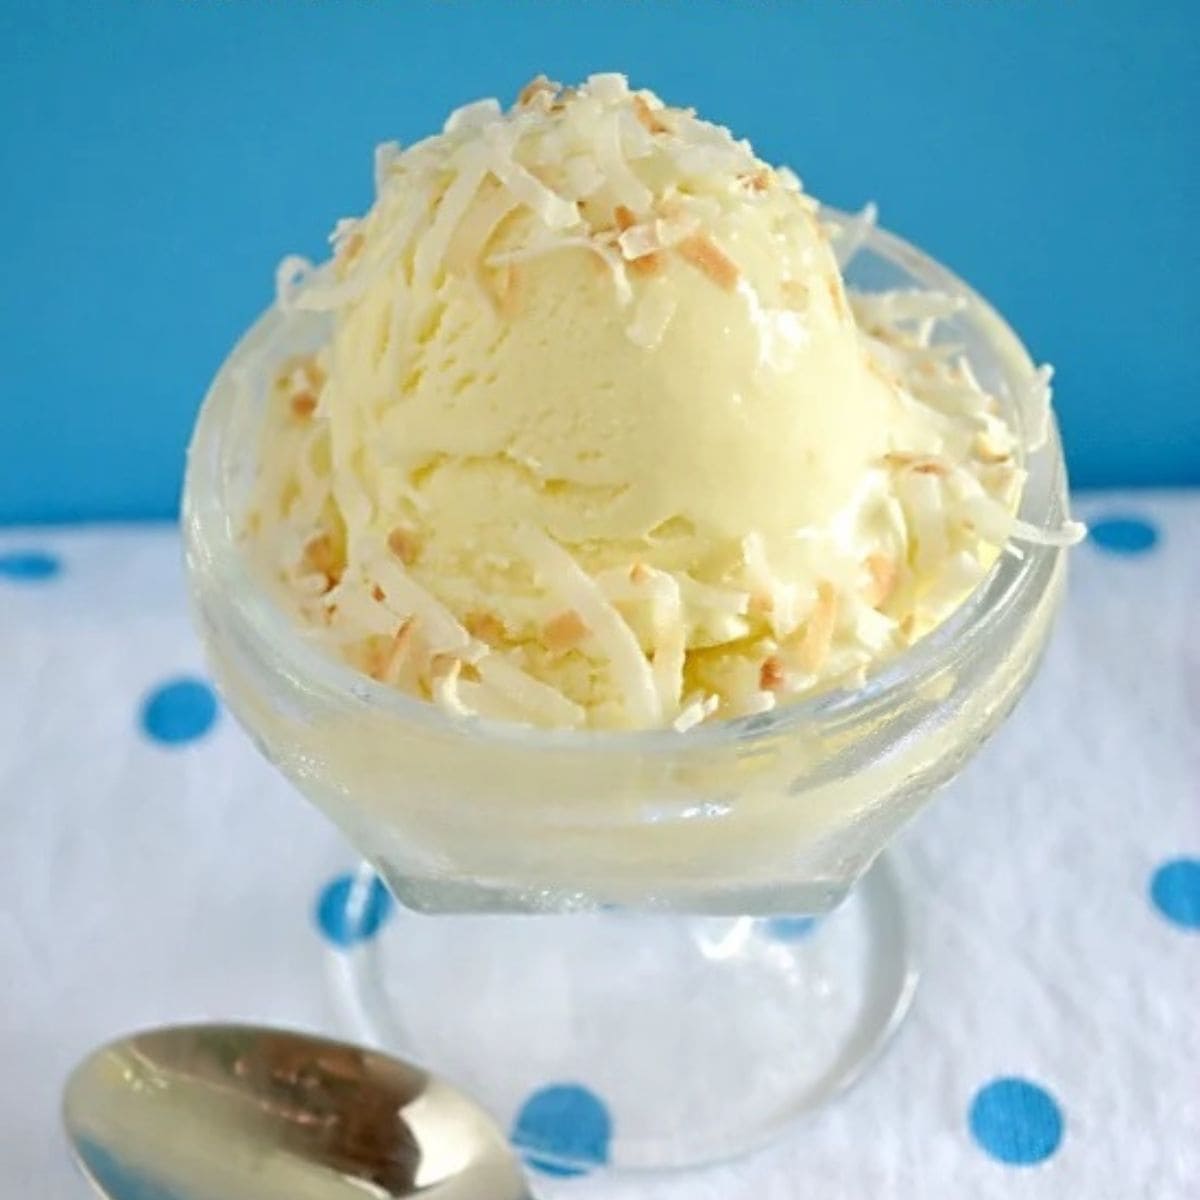 Toasted Coconut Ice Cream in a glass dessert bowl.